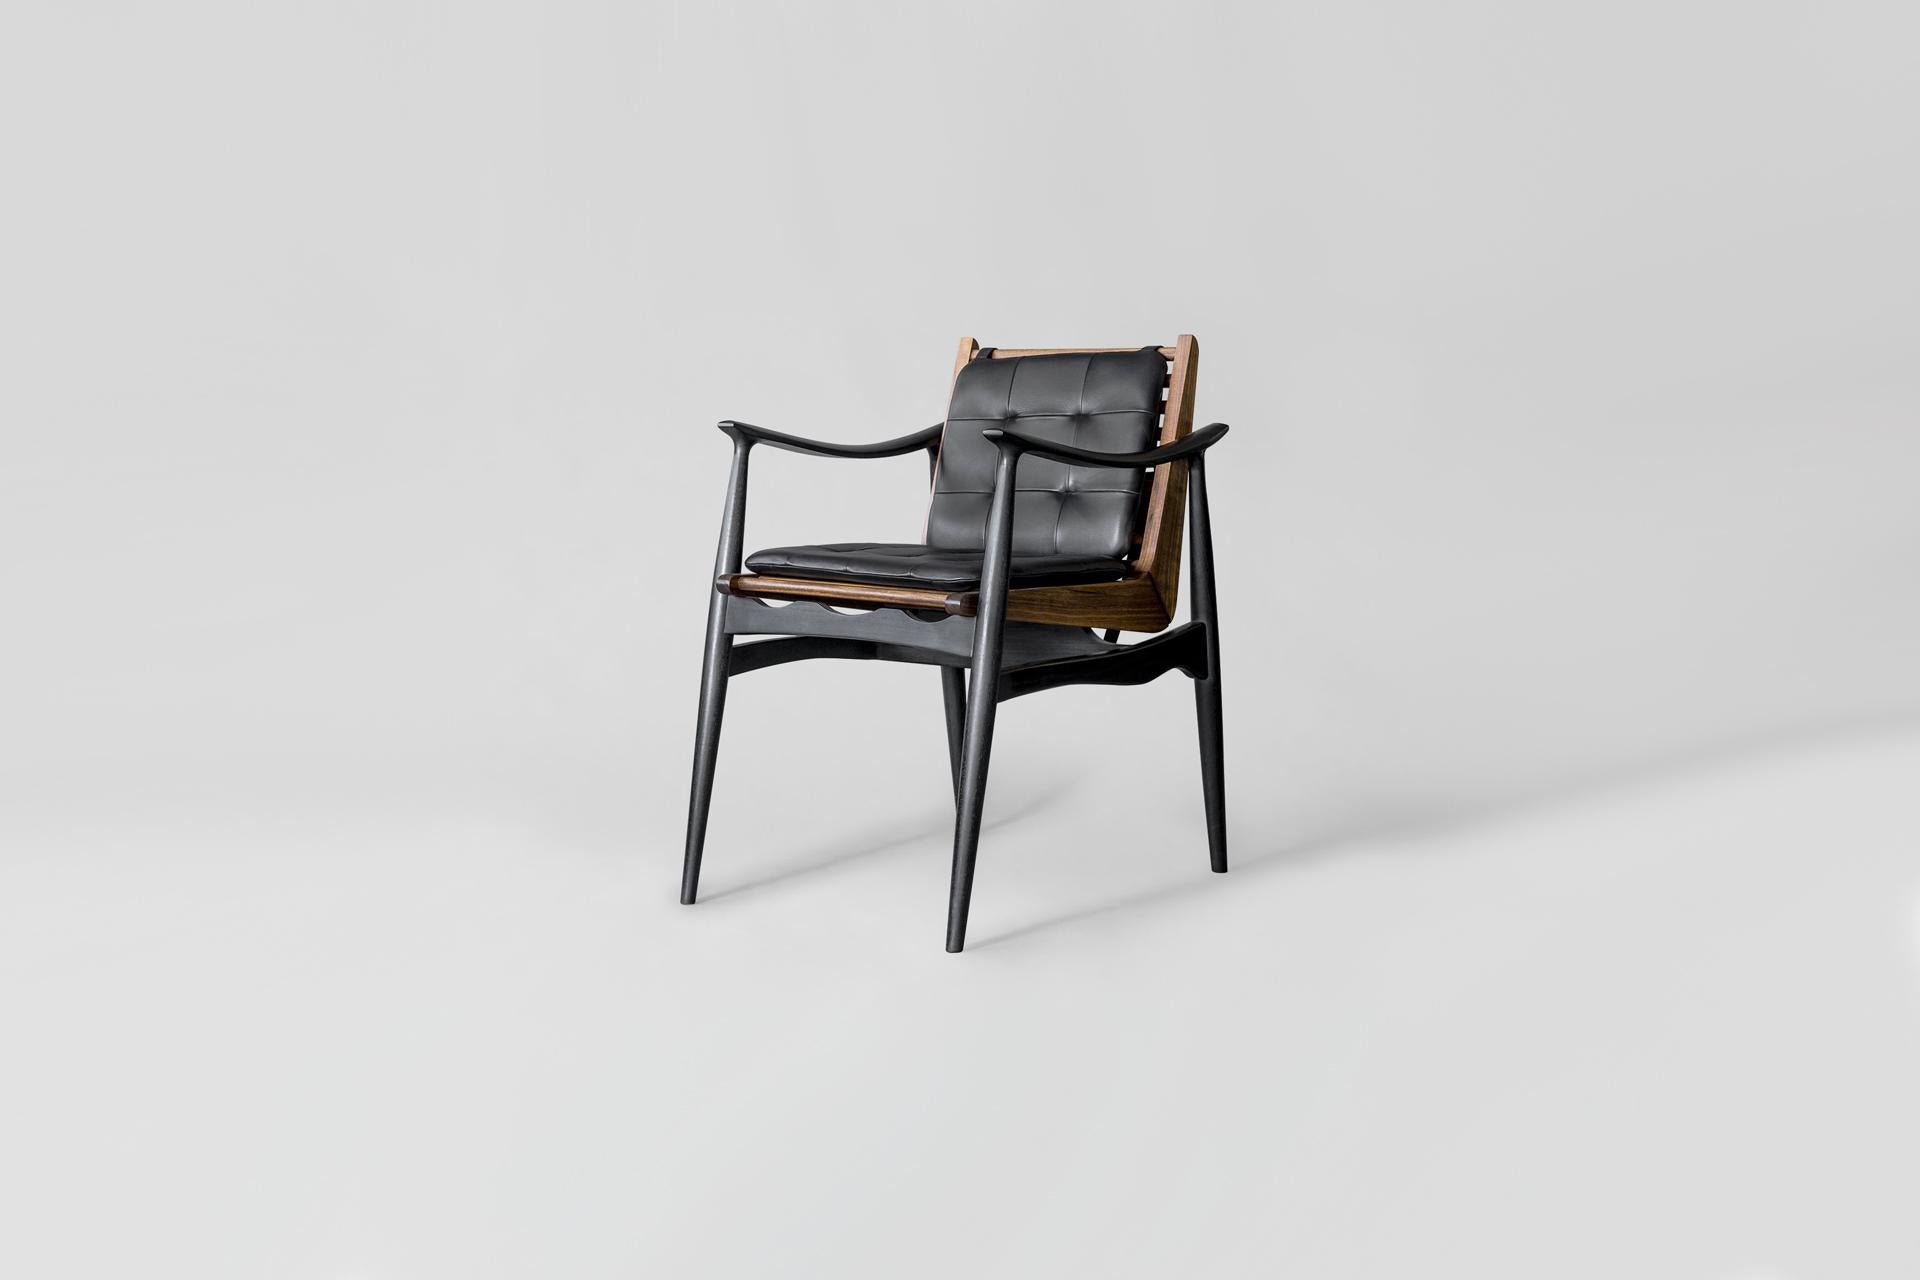 Atra dining chair by Atra Design
Dimensions: D 59.3 x W 57 x H 78.1 cm
Materials: leather, mahogany, charcoal walnut

Atra Design
We are Atra, a furniture brand produced by Atra form a mexico city–based high end production facility that also